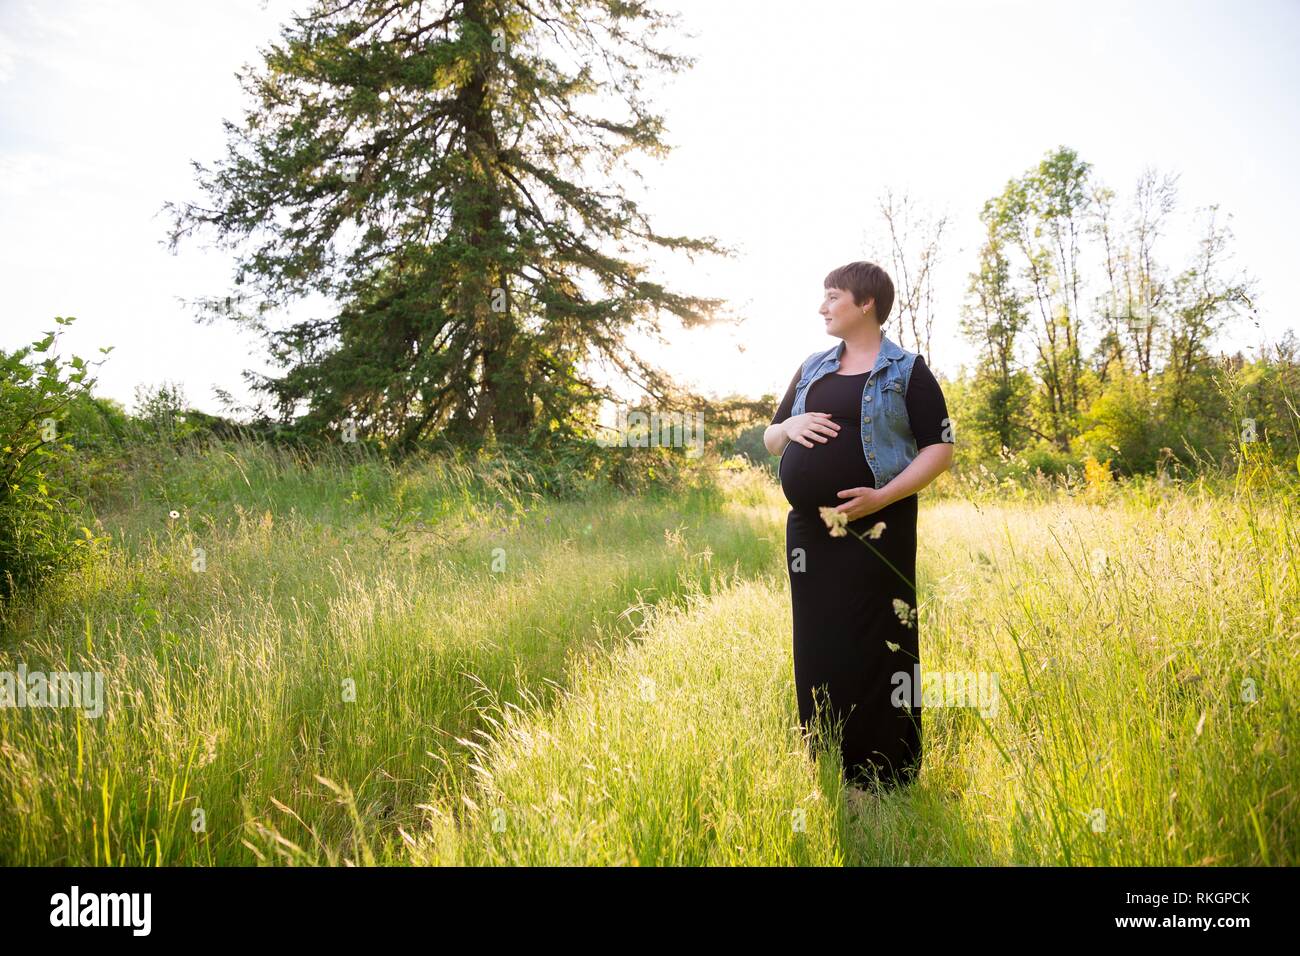 Maternity photo of a young woman with a short hair pixie cut in her third trimester with child. Stock Photo